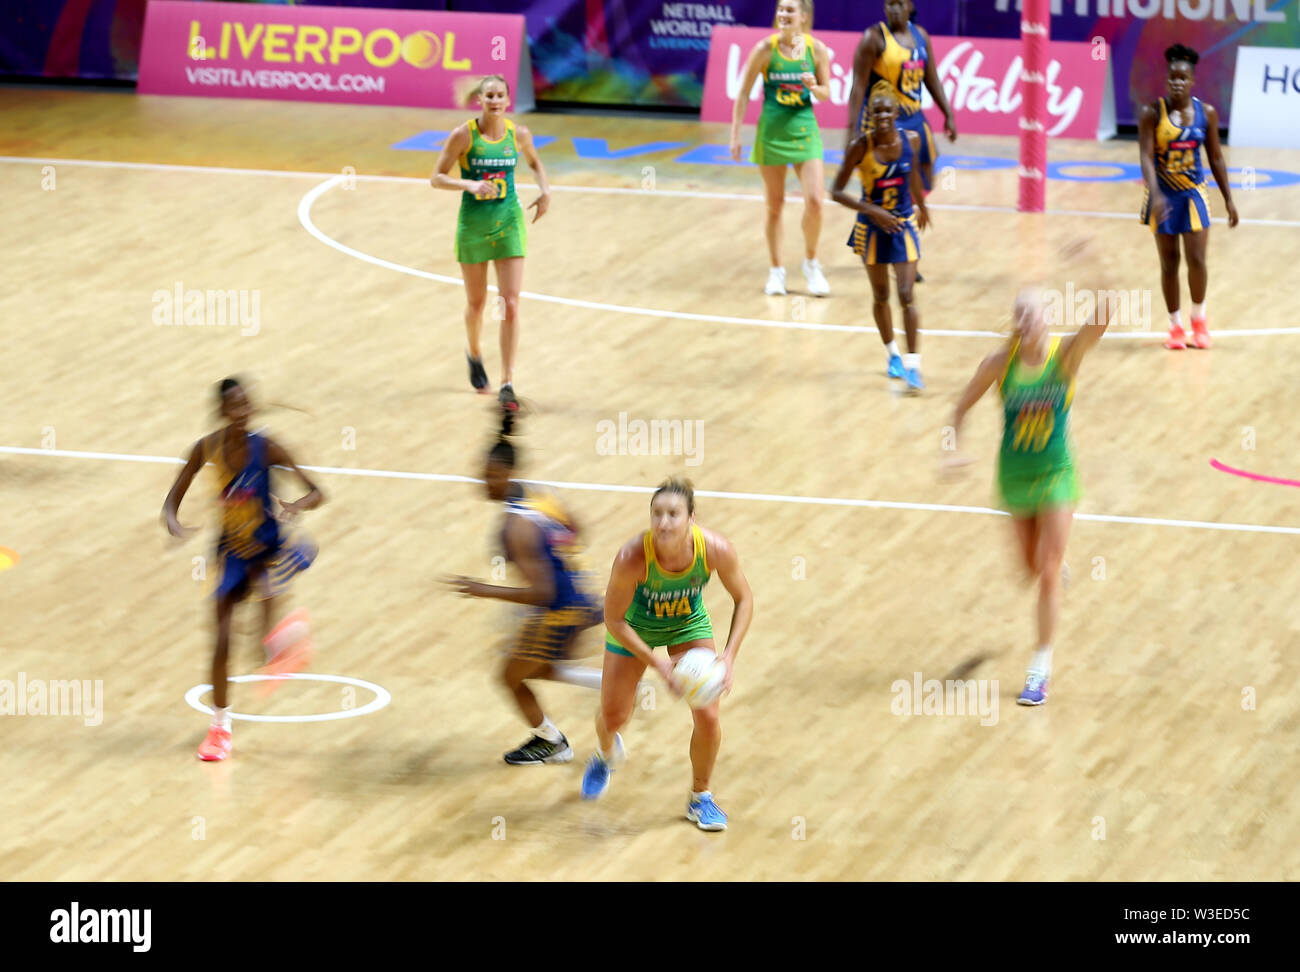 A general view of match action between Australia and Barbados during the Netball World Cup match at the M&S Bank Arena, Liverpool. Stock Photo